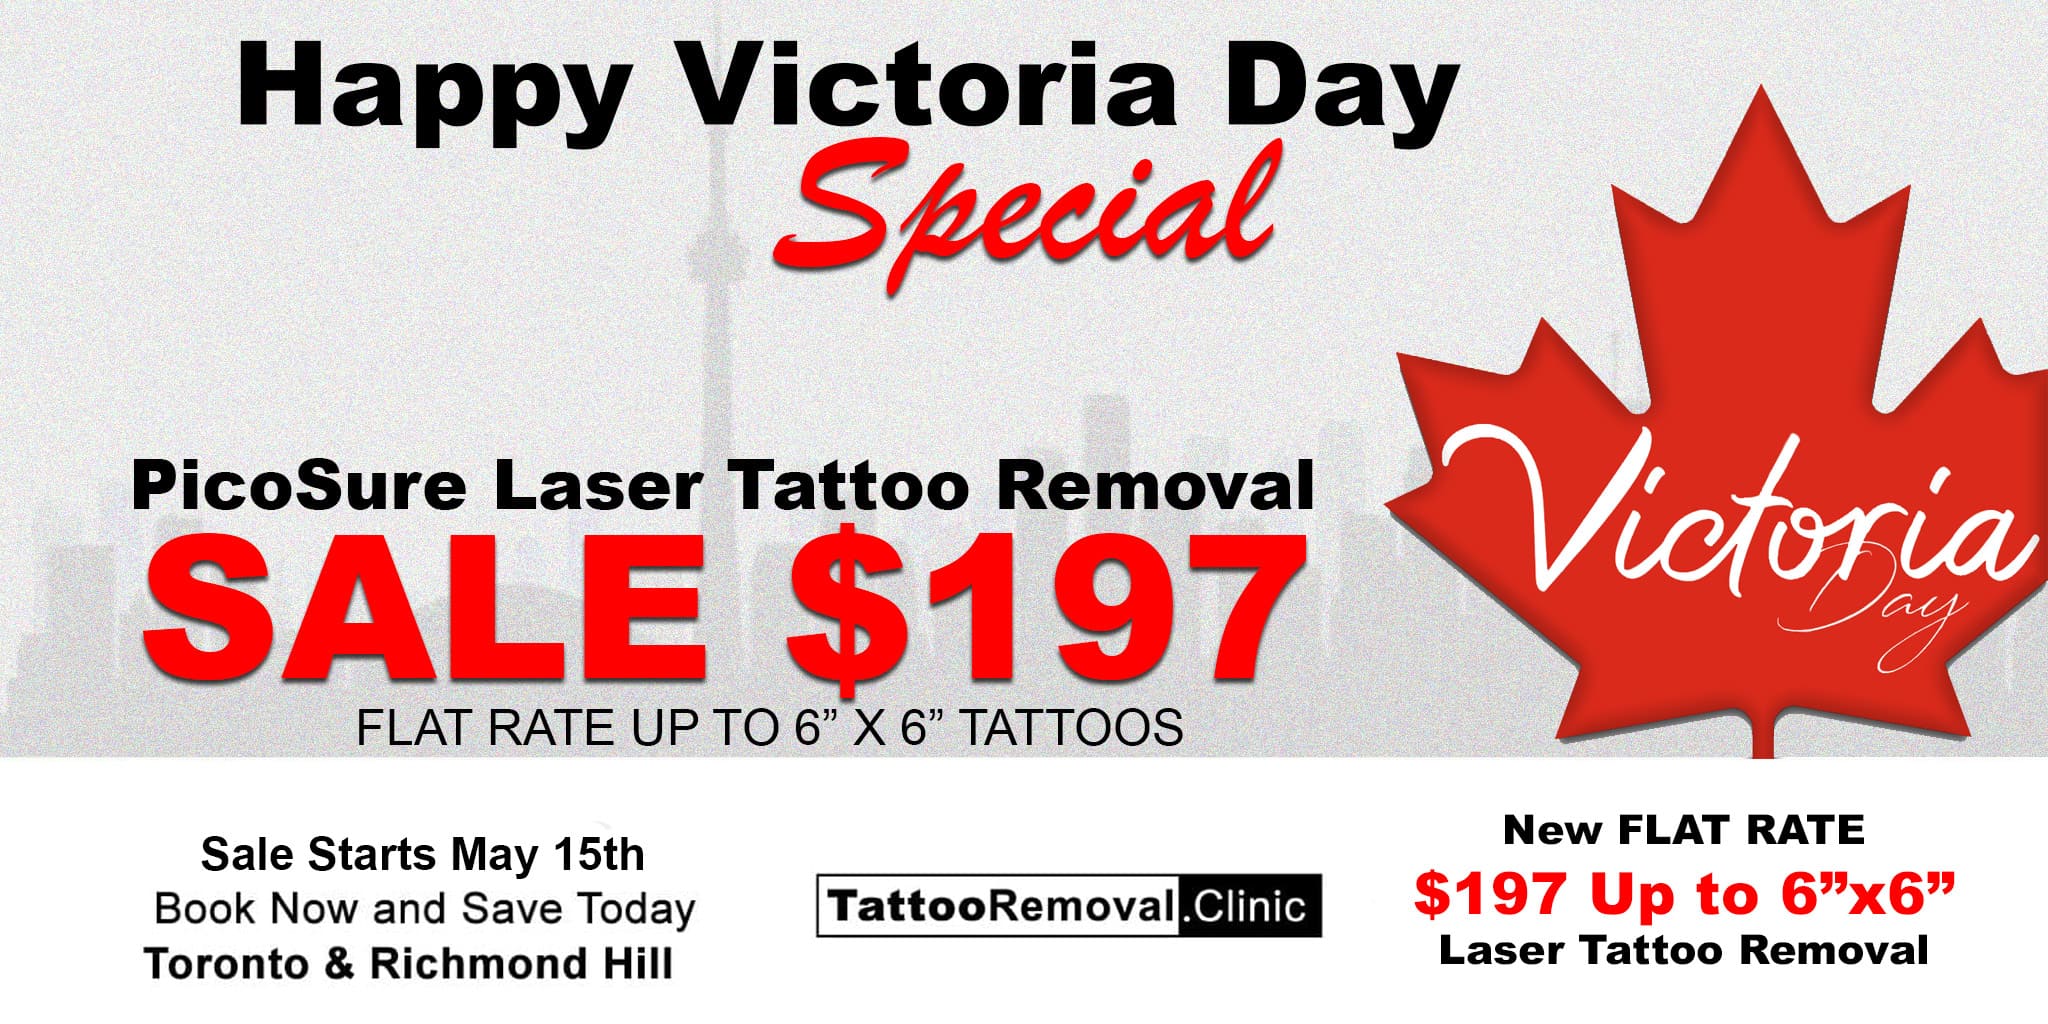 laser-tattoo-removal-Tattoo-Removal-Clinic